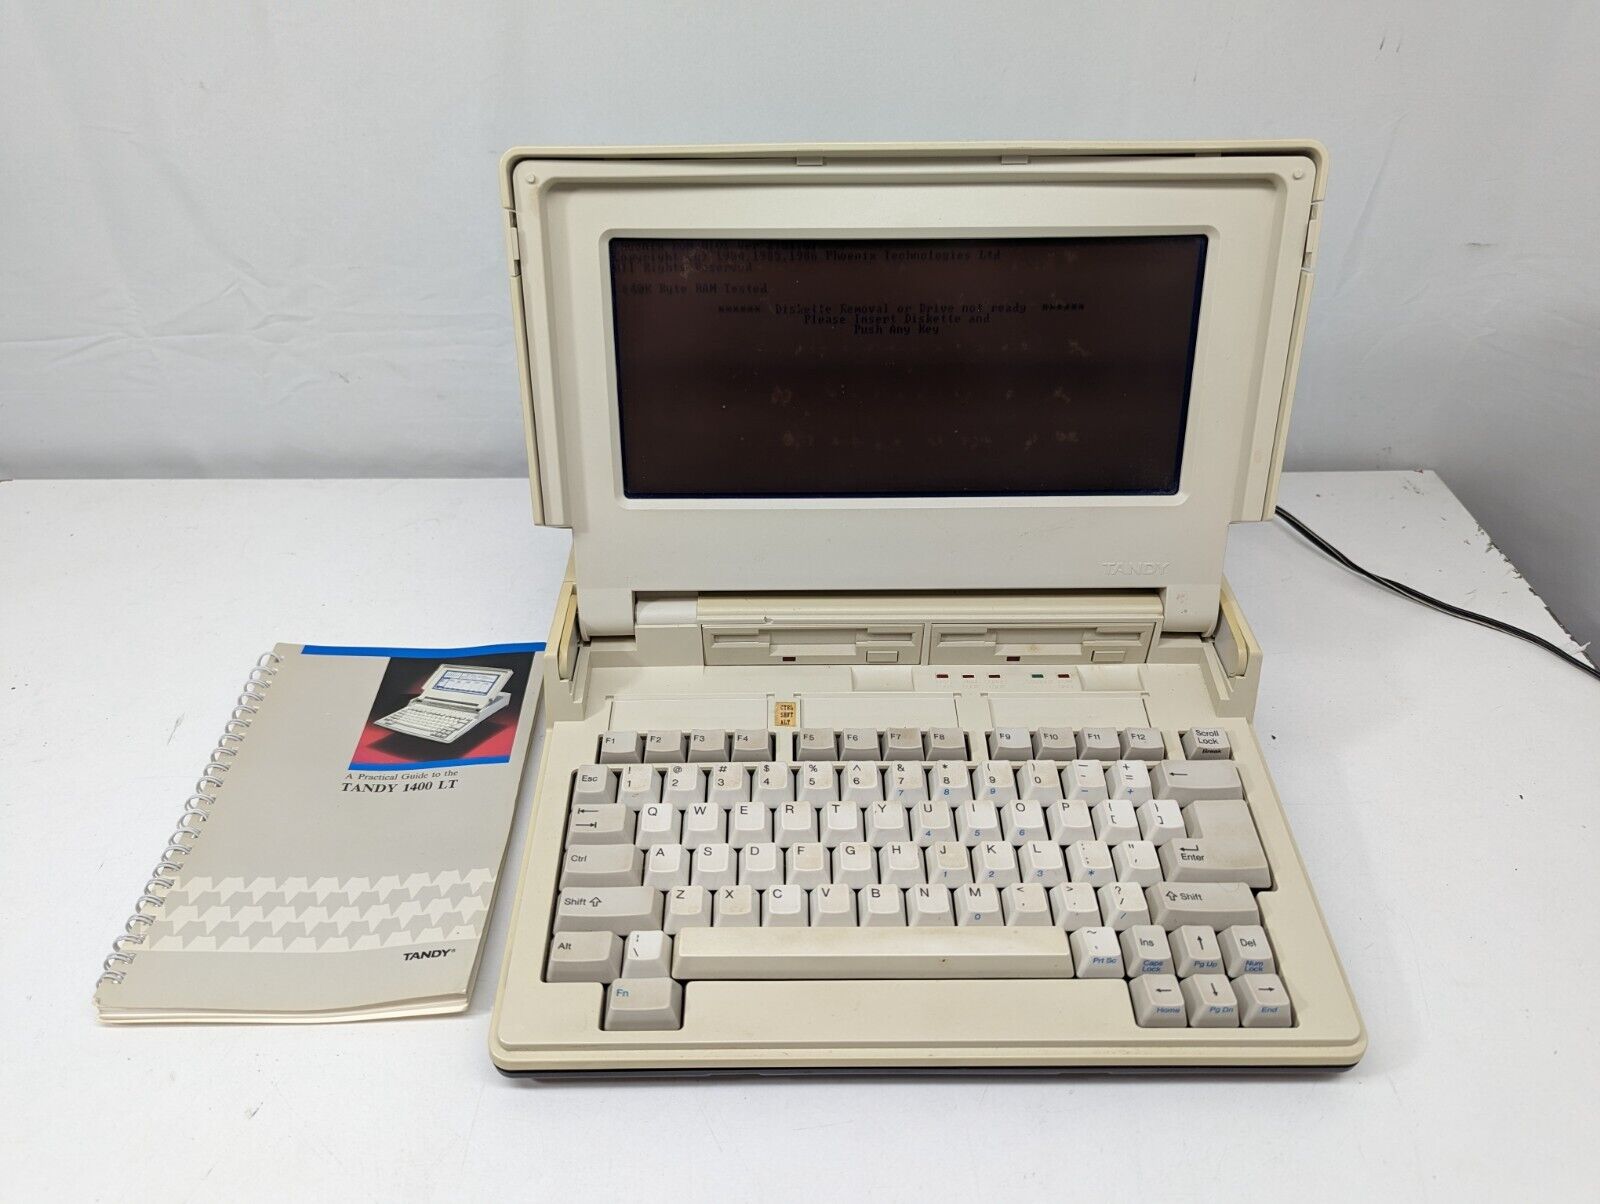 Vintage Tandy 1400 Personal Computer LT w/ Manual, Carrying Case, AC Adapter